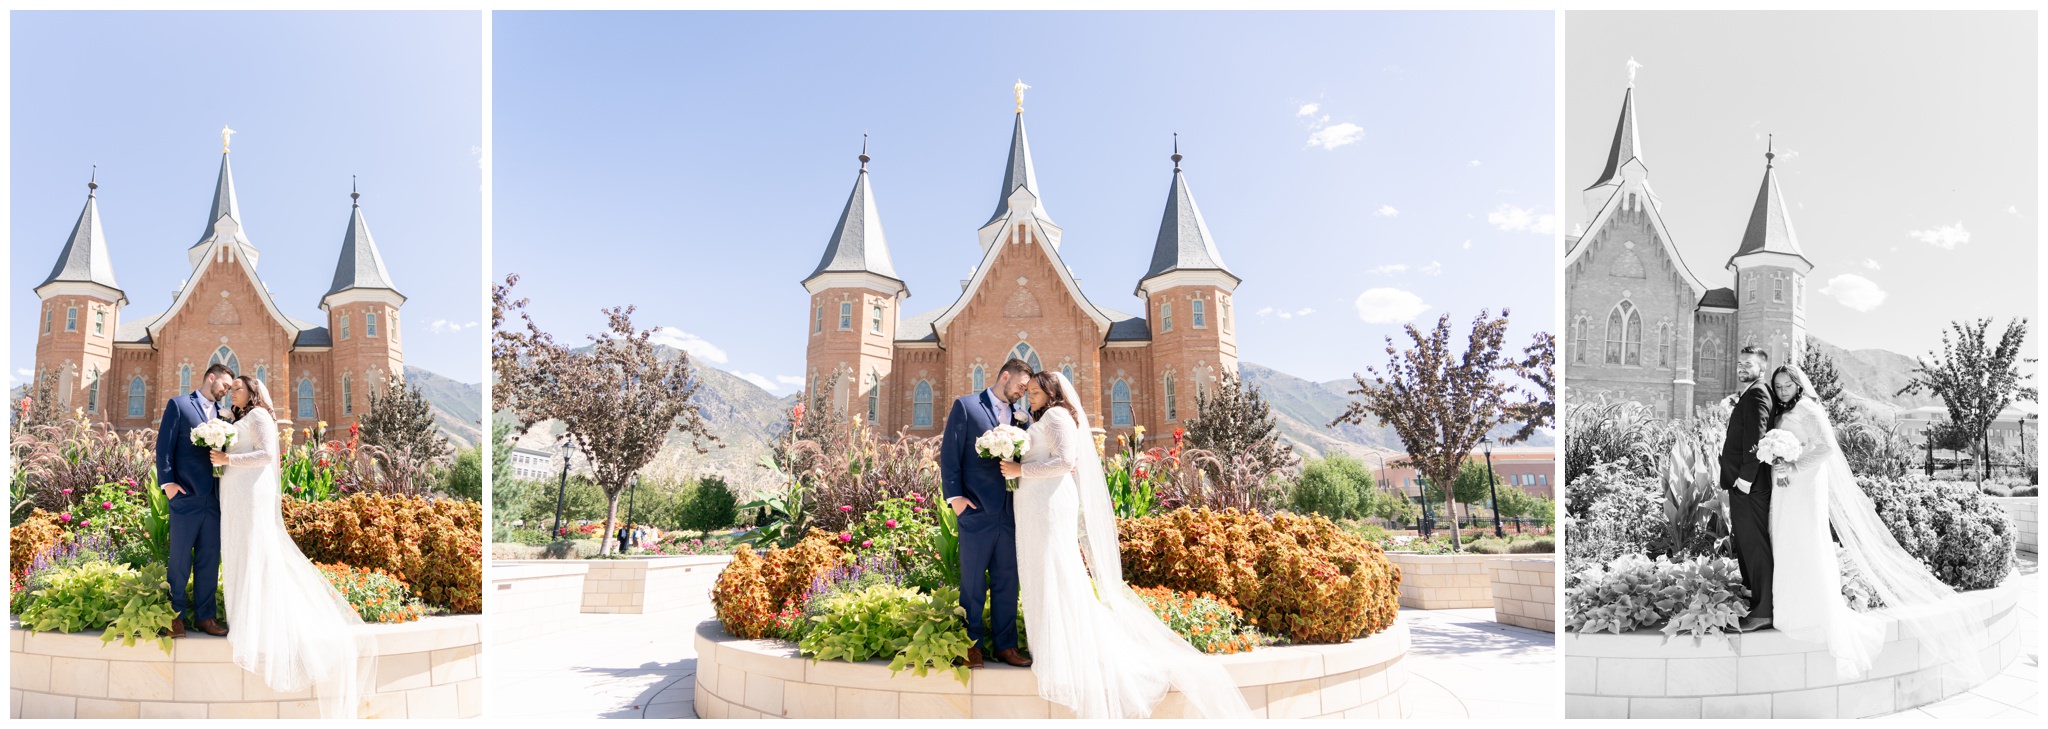 Bride and Groom at the Provo City Center Temple